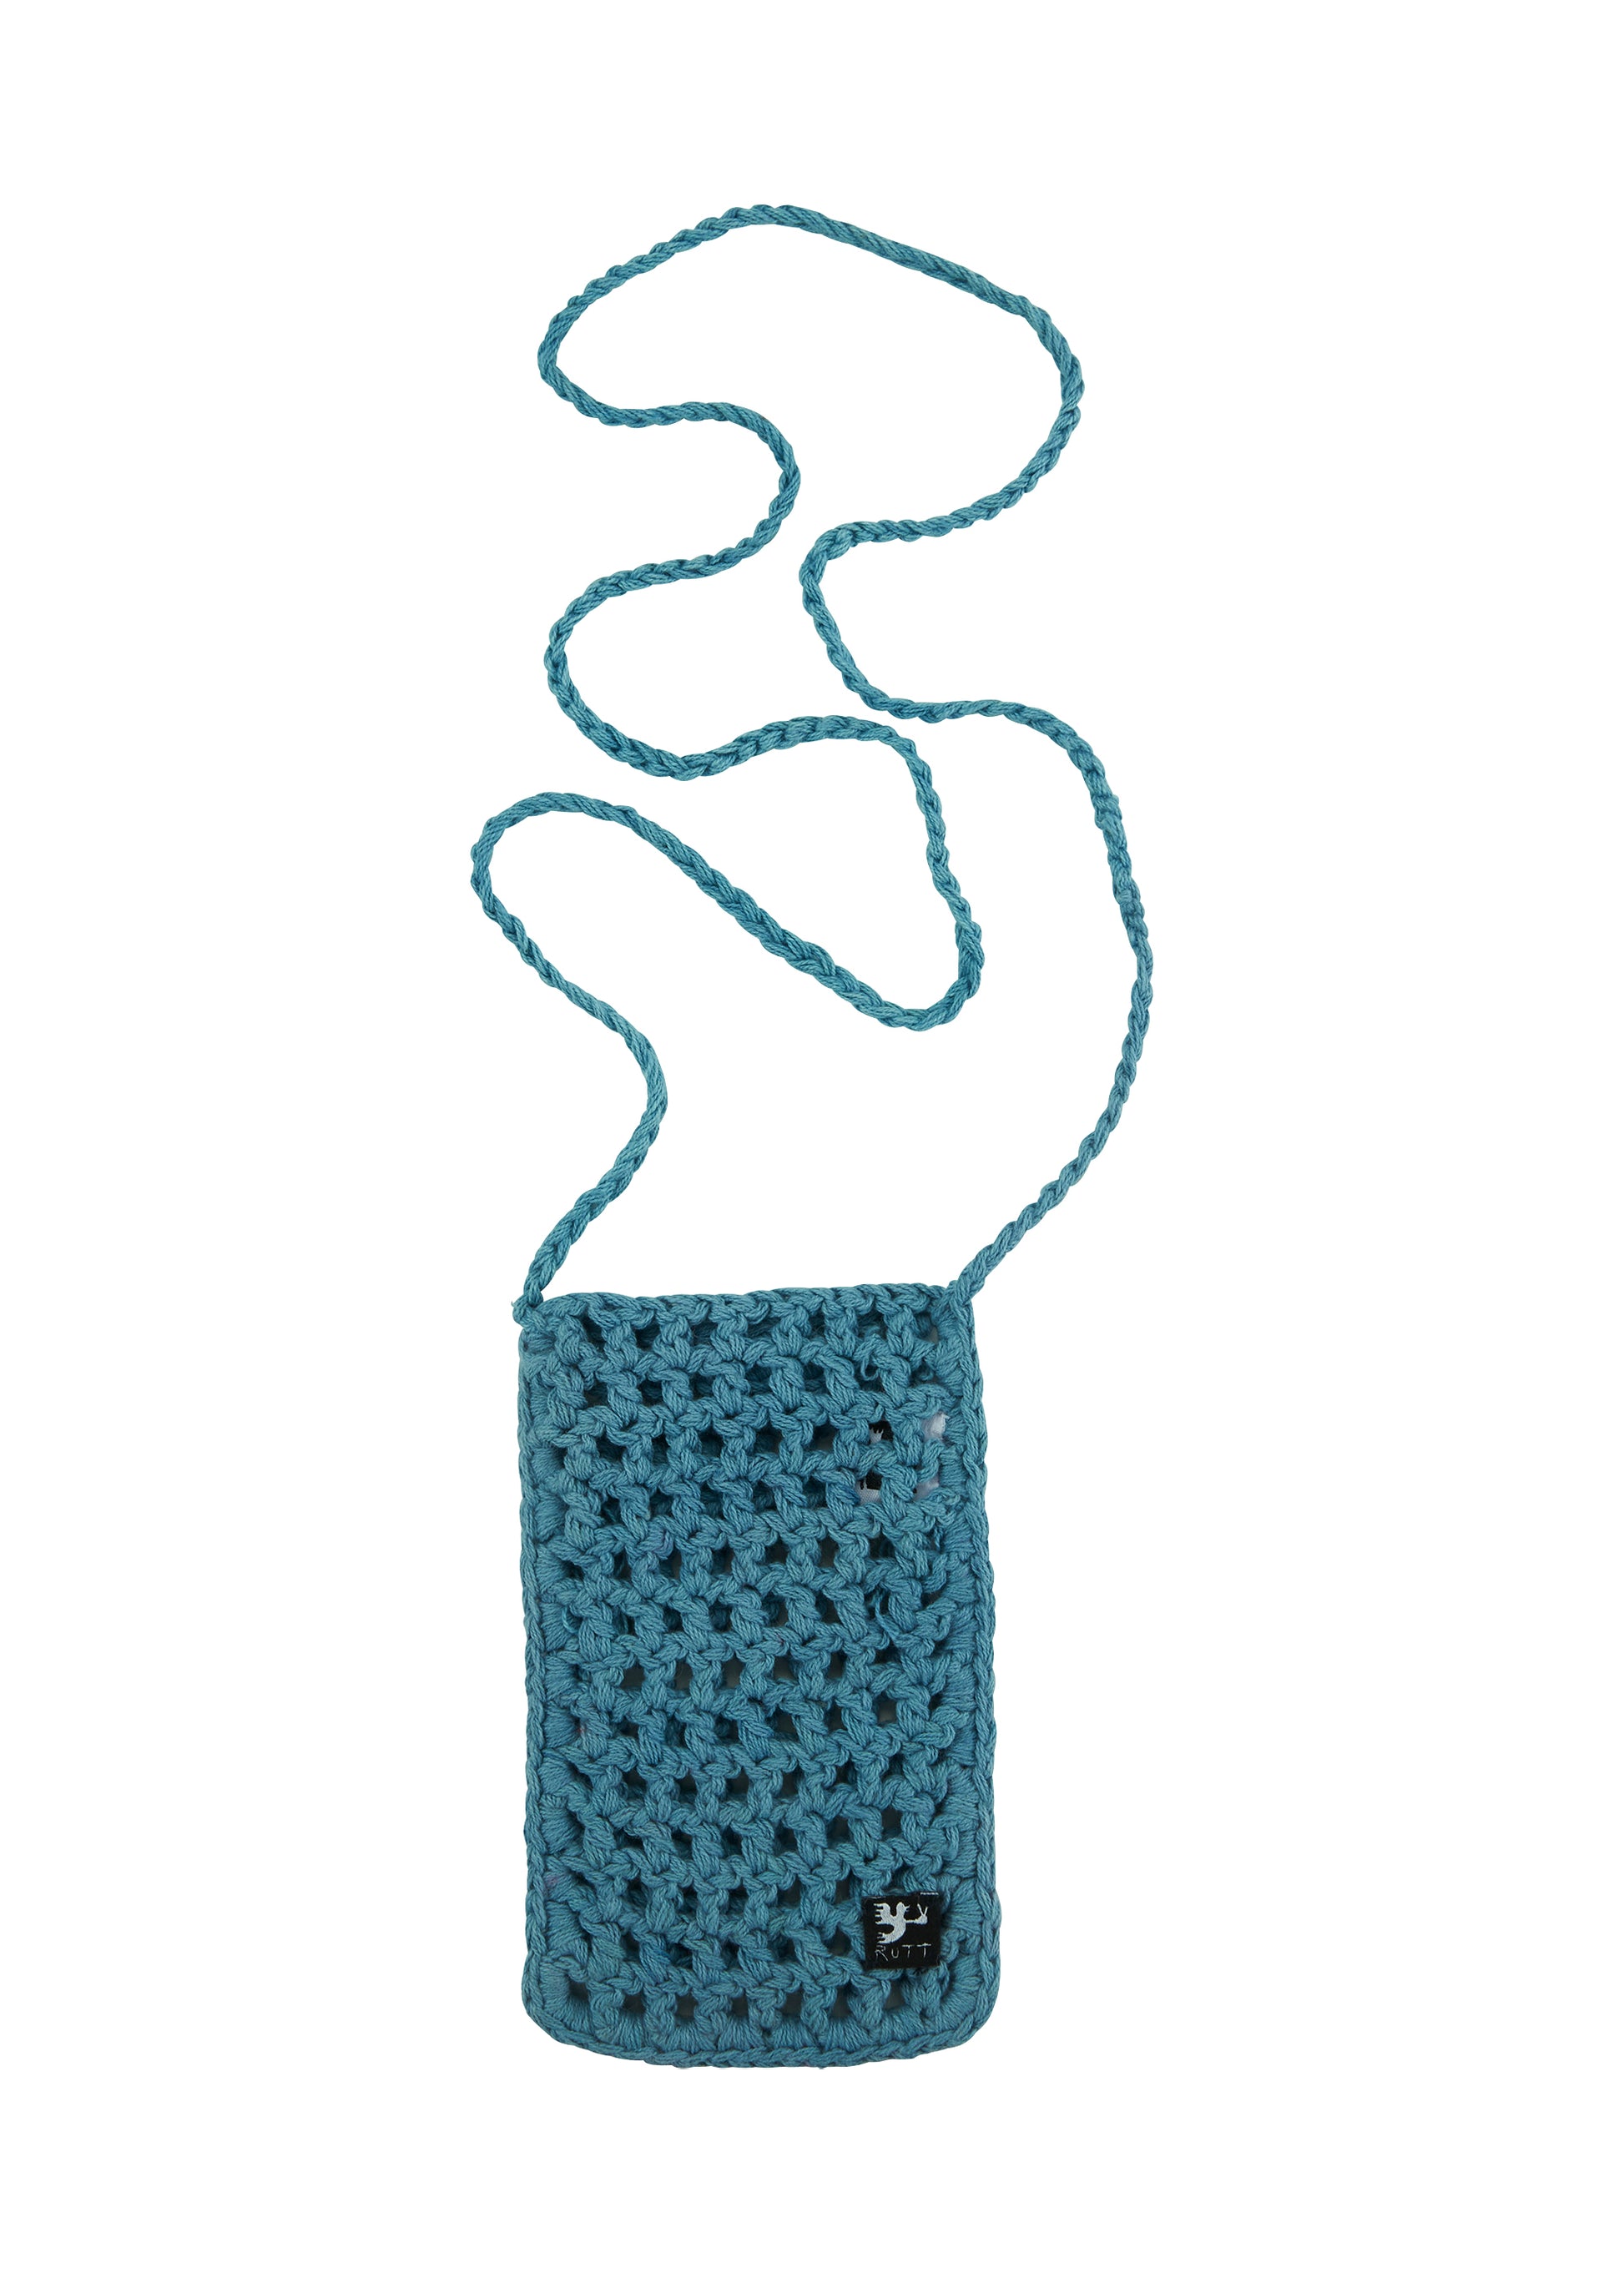 Cotton crochet pocket sling for phones and small items in Blue.